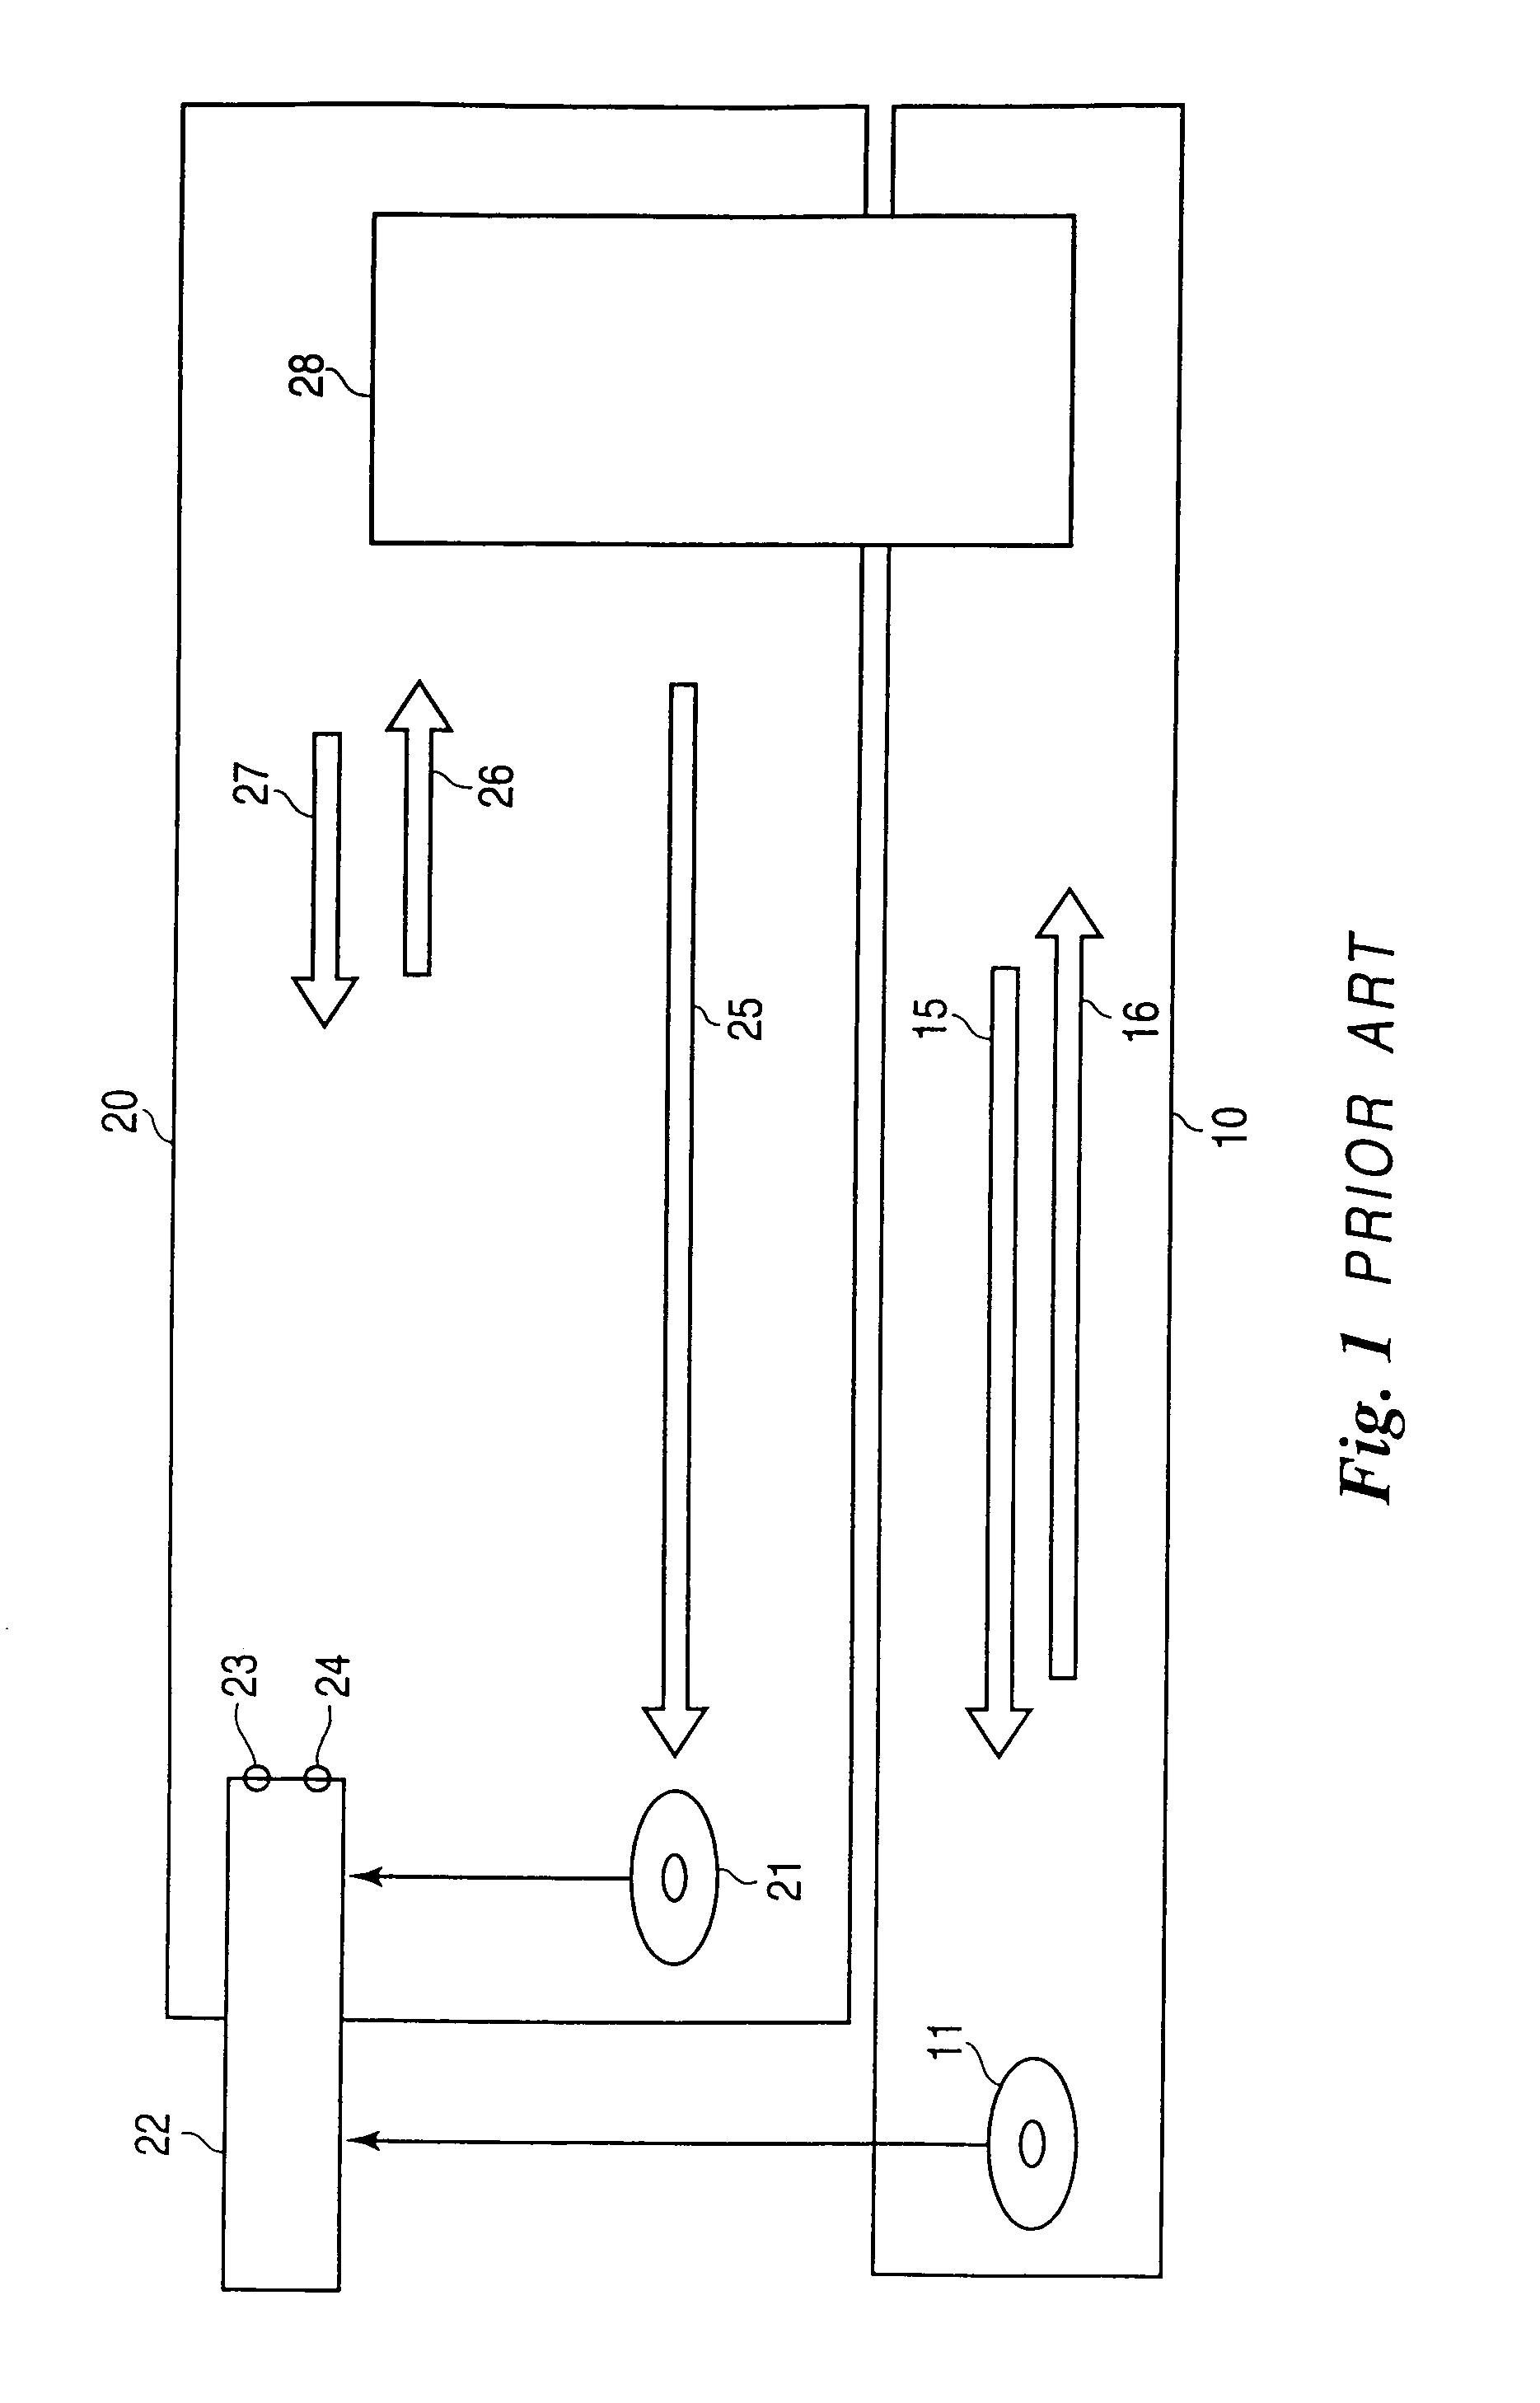 Method apparatus and systems for producing and writing cipher keys, reproducing information with a cipher key, and for permitting reproduction of information with a cipher key, and permitting reproduction of information with a cipher key, and optical disc recorded with a cipher key